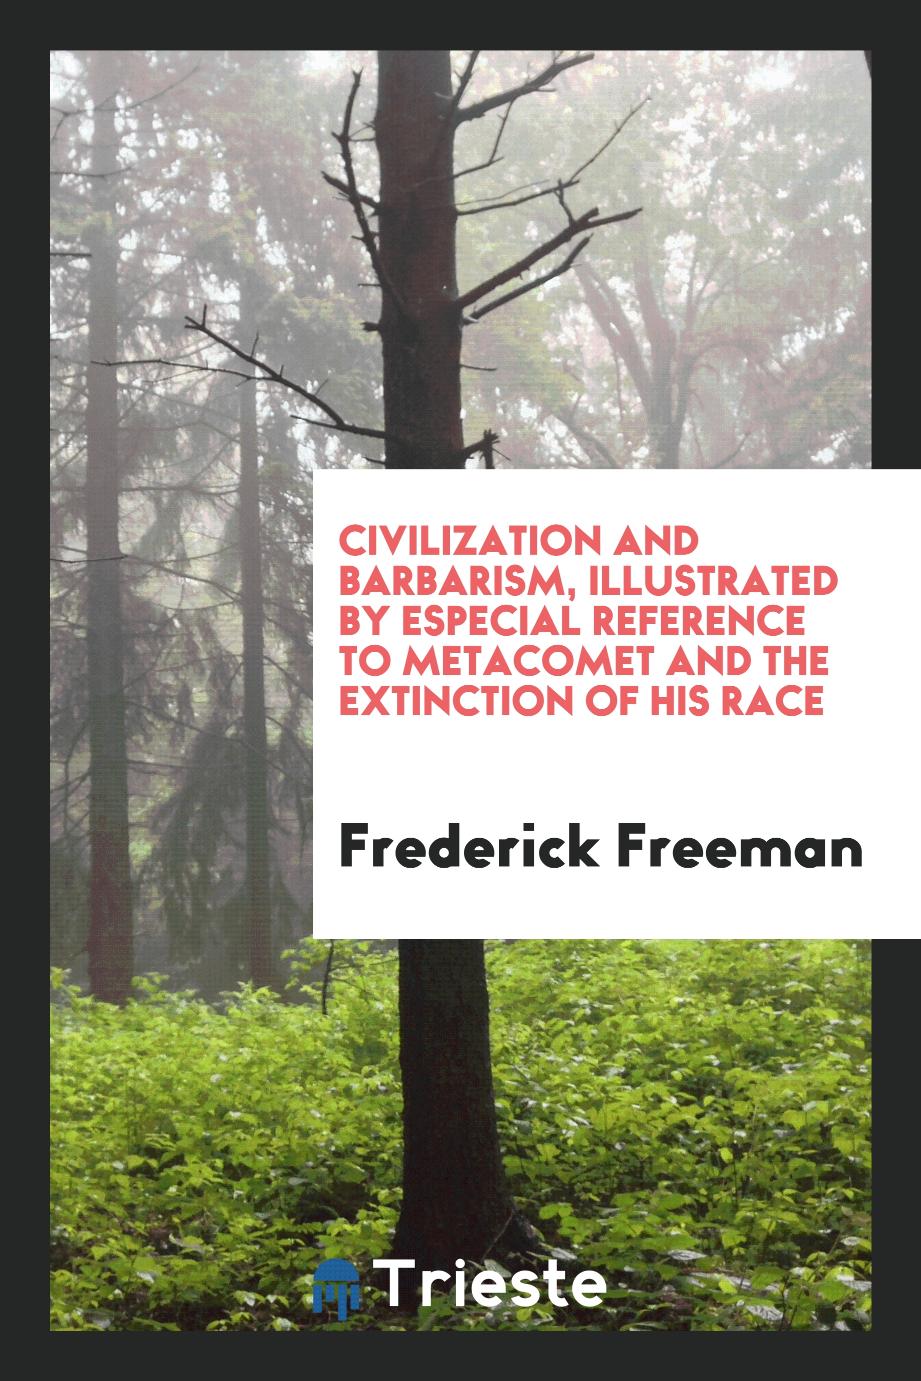 Civilization and barbarism, illustrated by especial reference to Metacomet and the extinction of his race